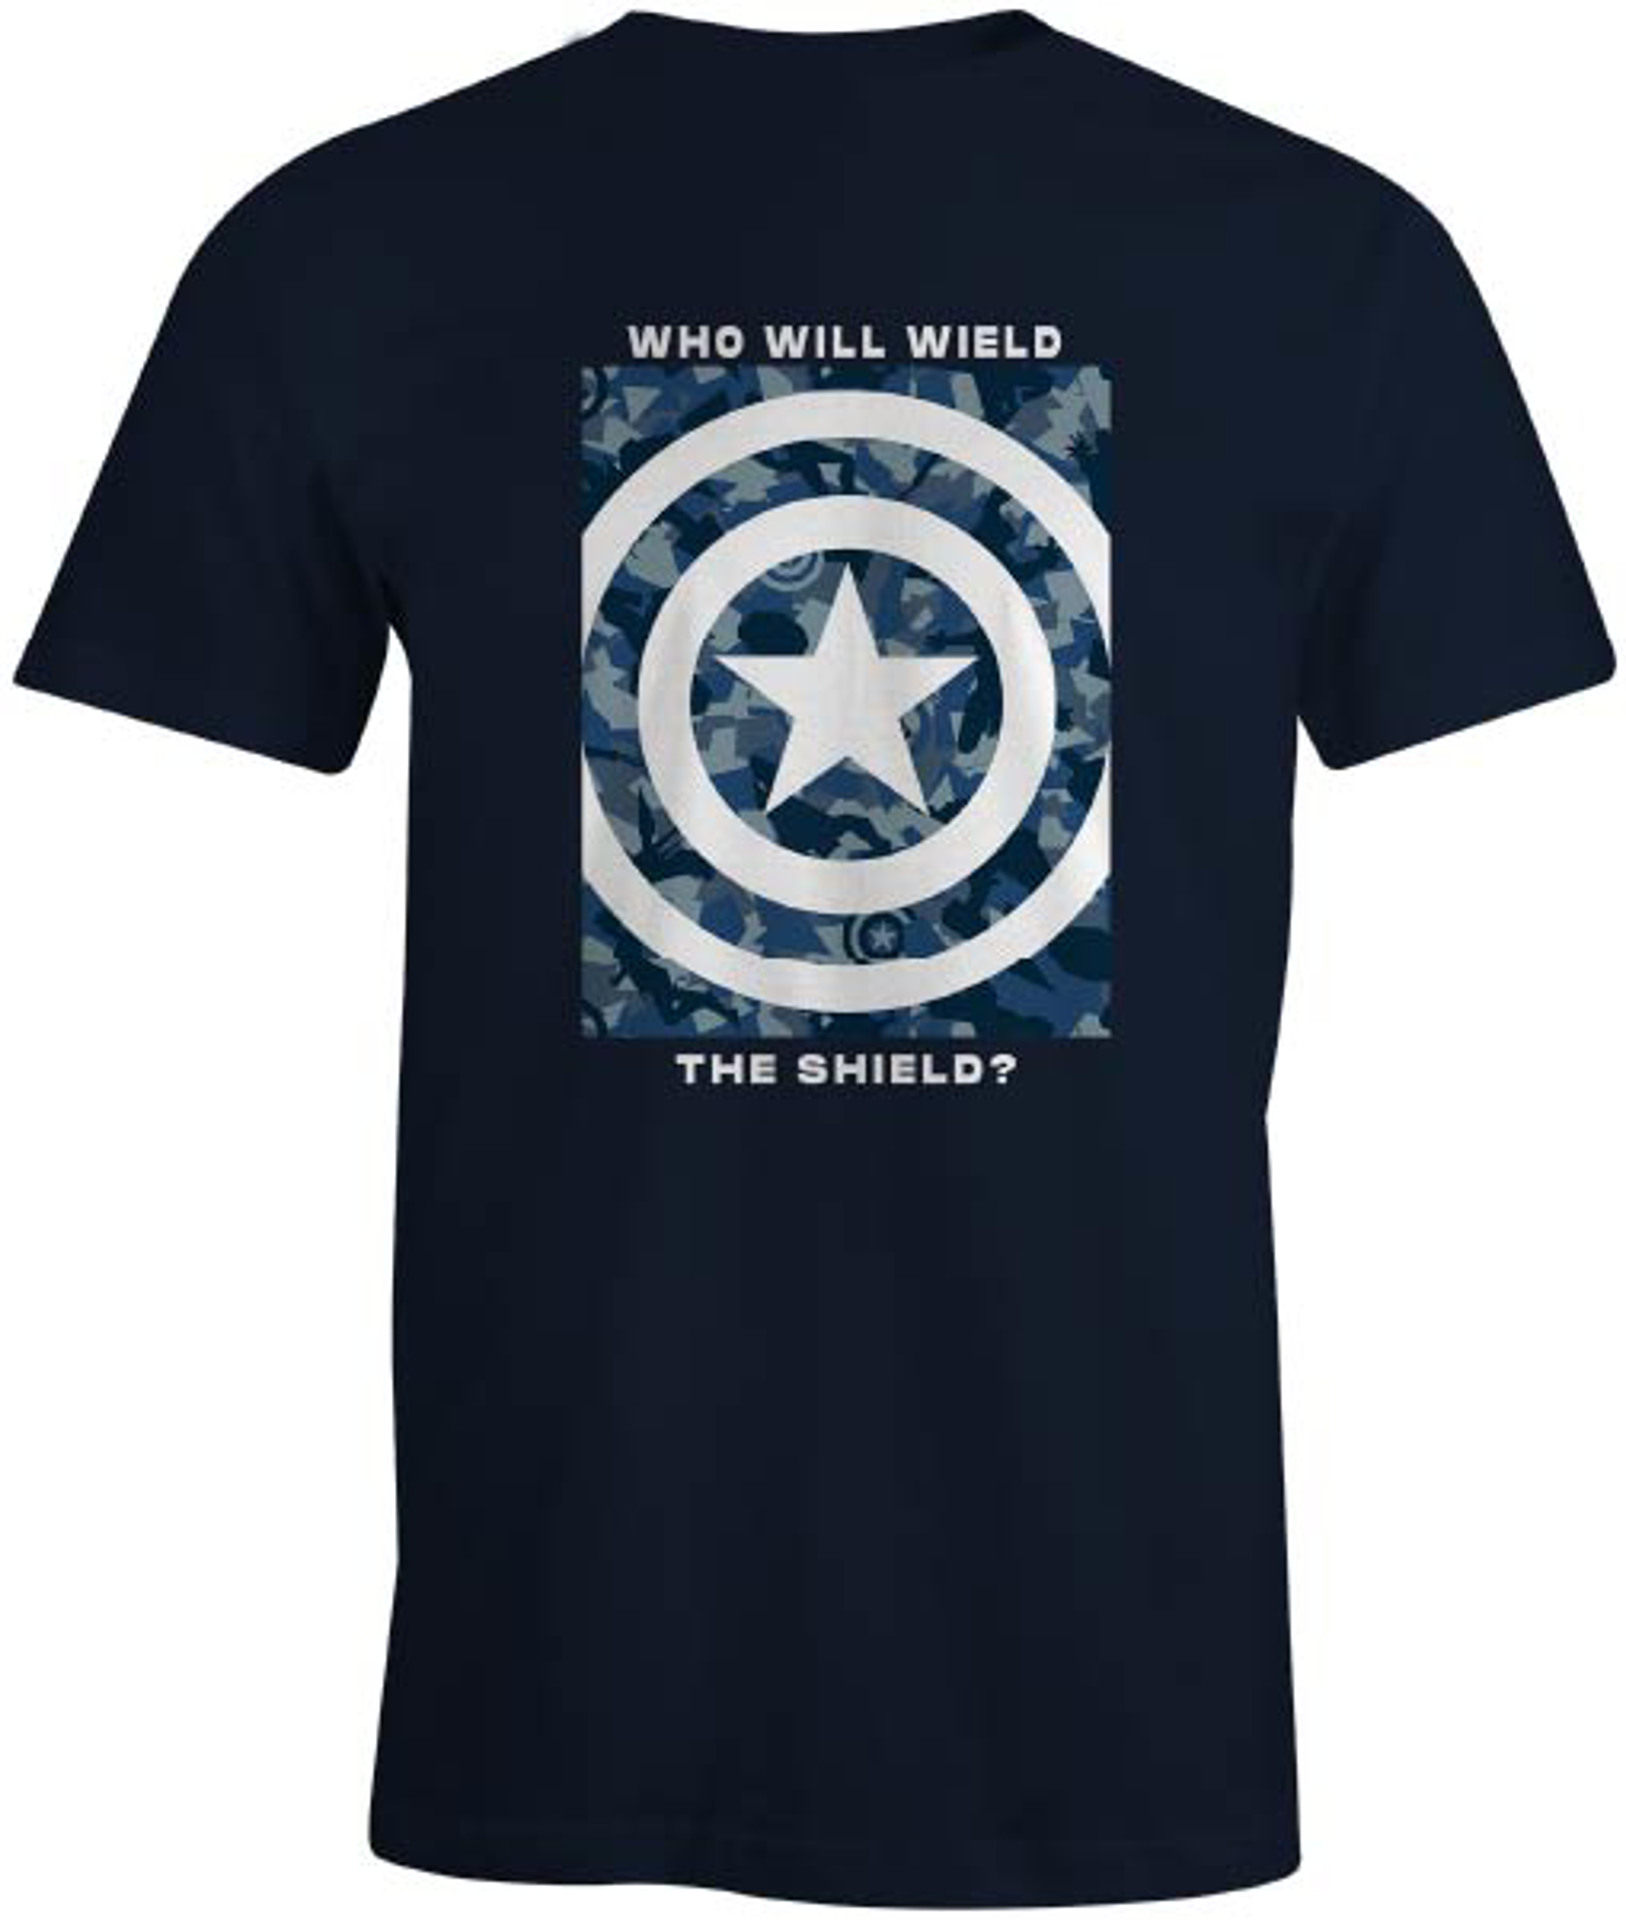 Marvel - Captain America - T-shirt Bleu Marine Hommes - Who will wield the shield? - M